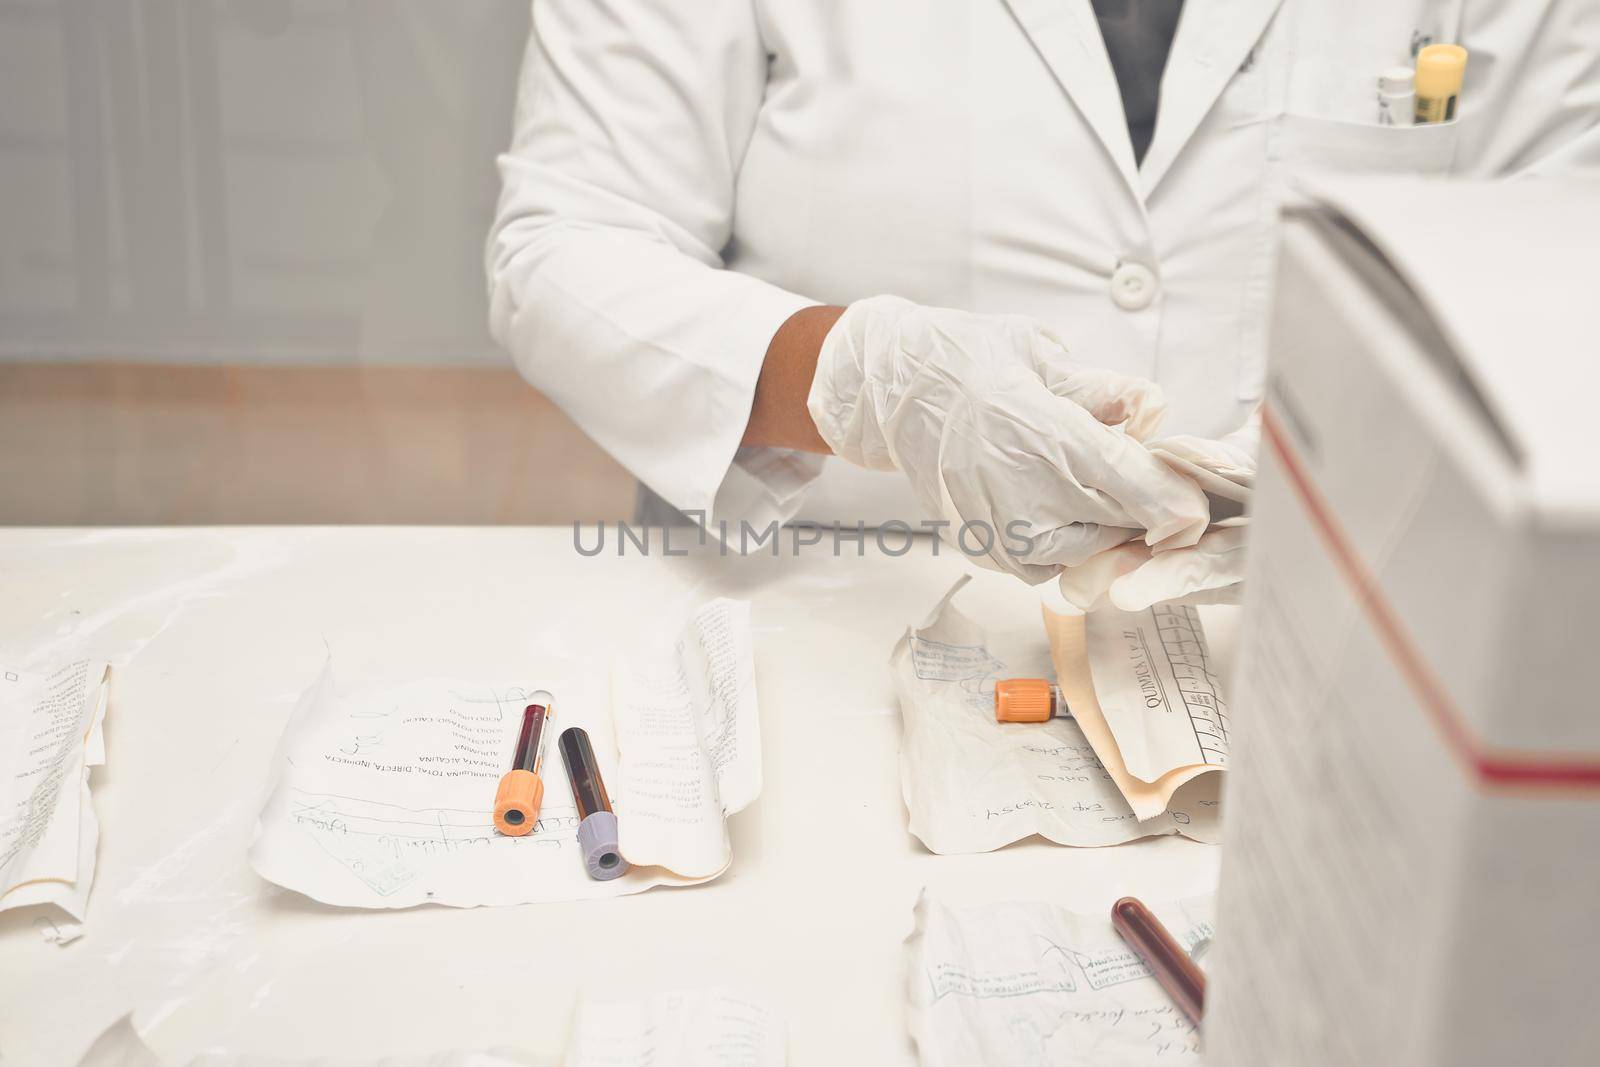 Unrecognizable Latina clinical laboratory worker sorting blood samples in a hospital